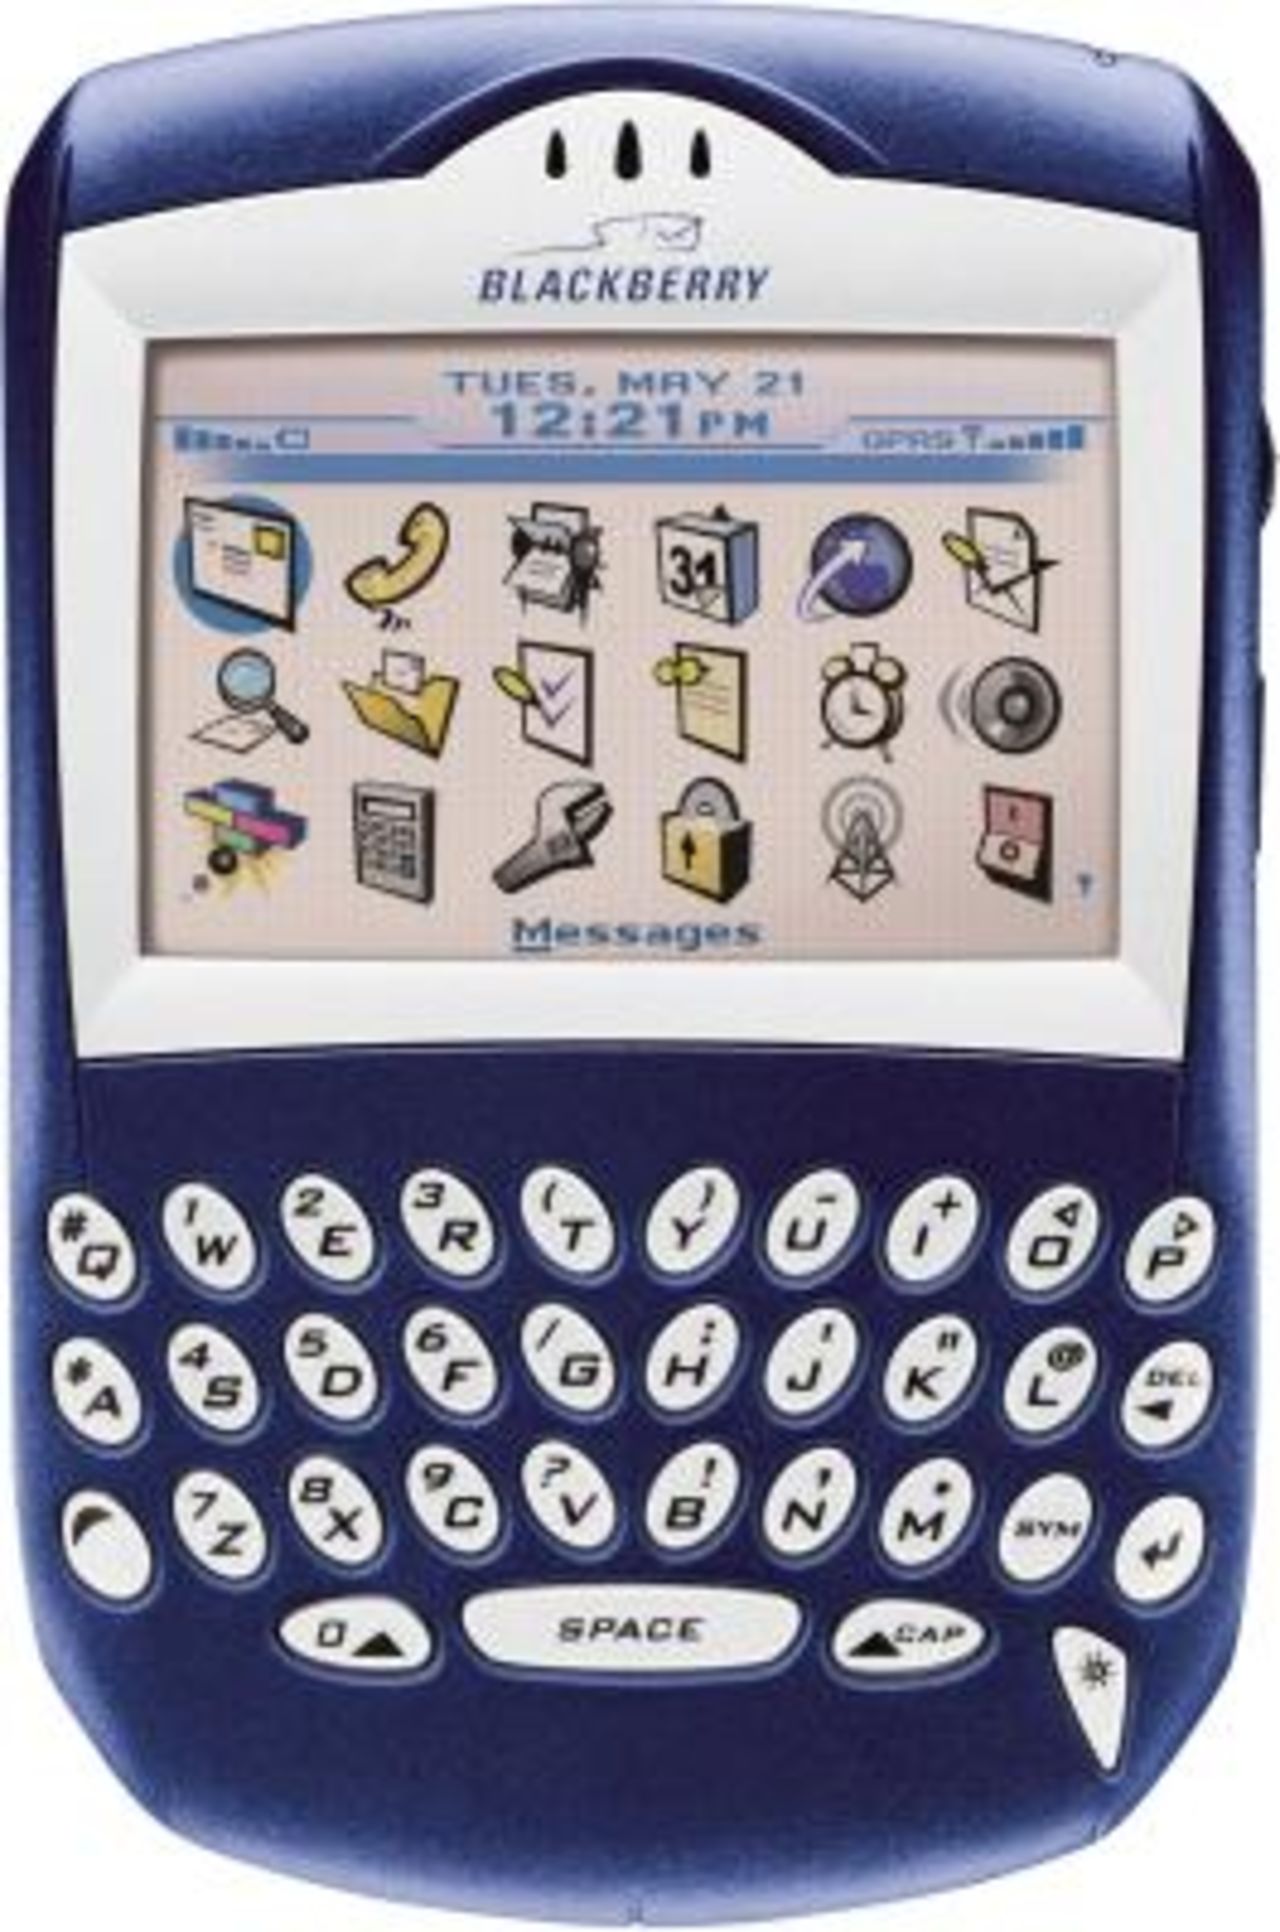 In 2003, BlackBerry debuted its first phone with a color screen. It was cutting-edge technology, and the classic blue shell set the precedent for how the company's future lines would look.